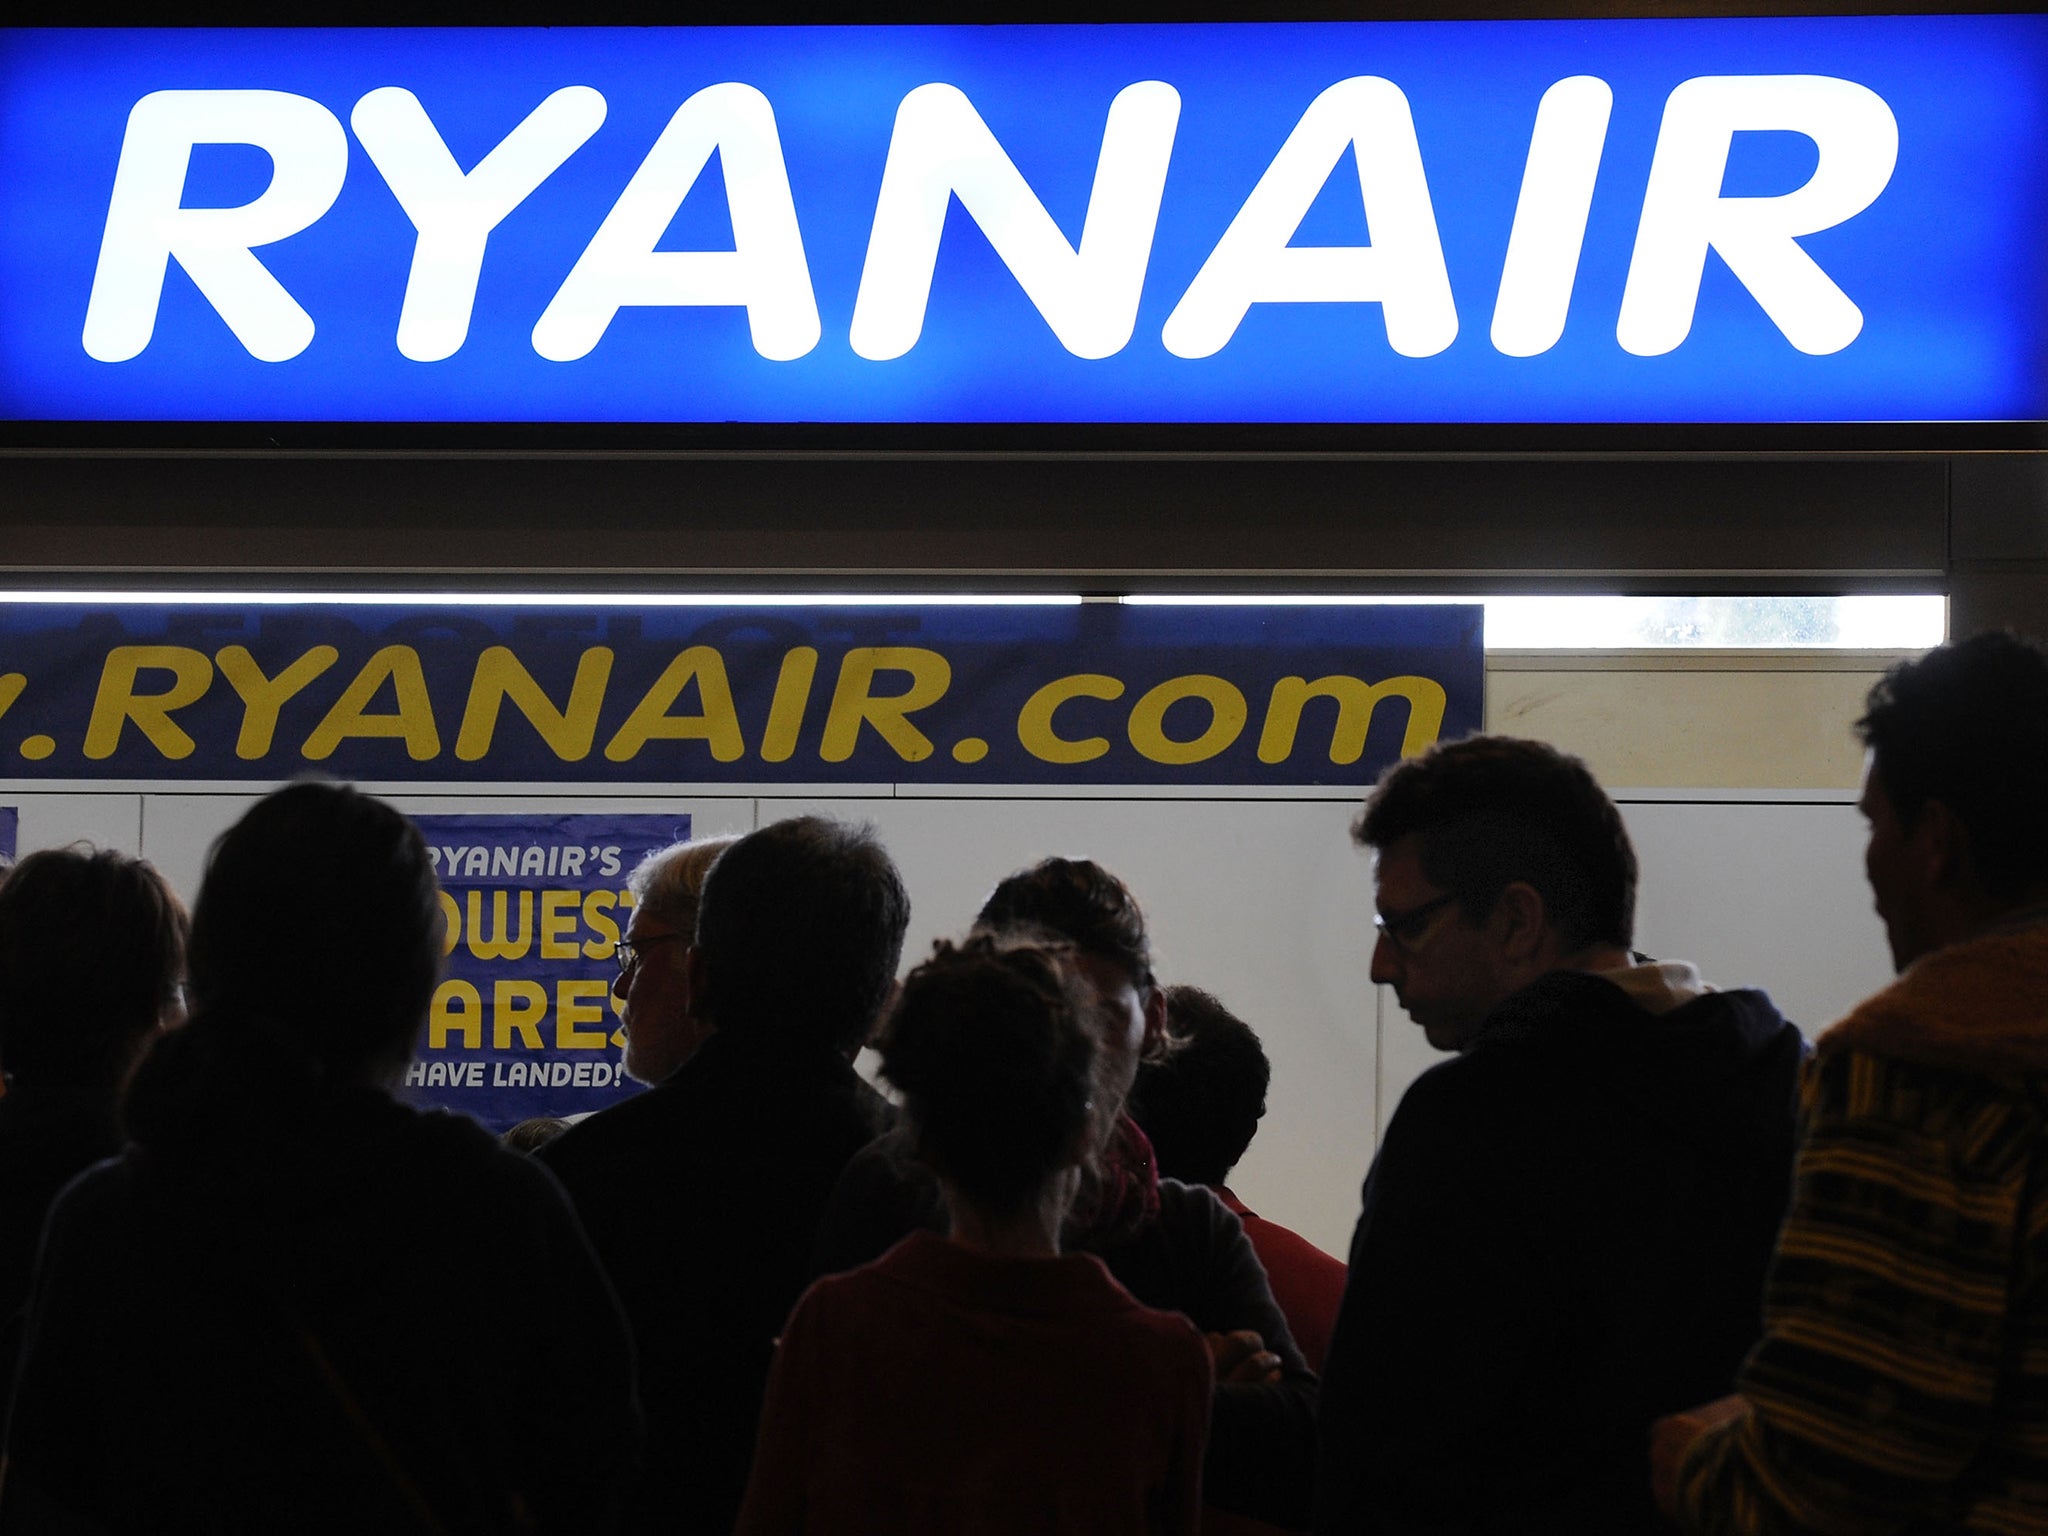 Ryanair said the incident was a 'hoax' and apologised for the inconvenience caused (file photo)